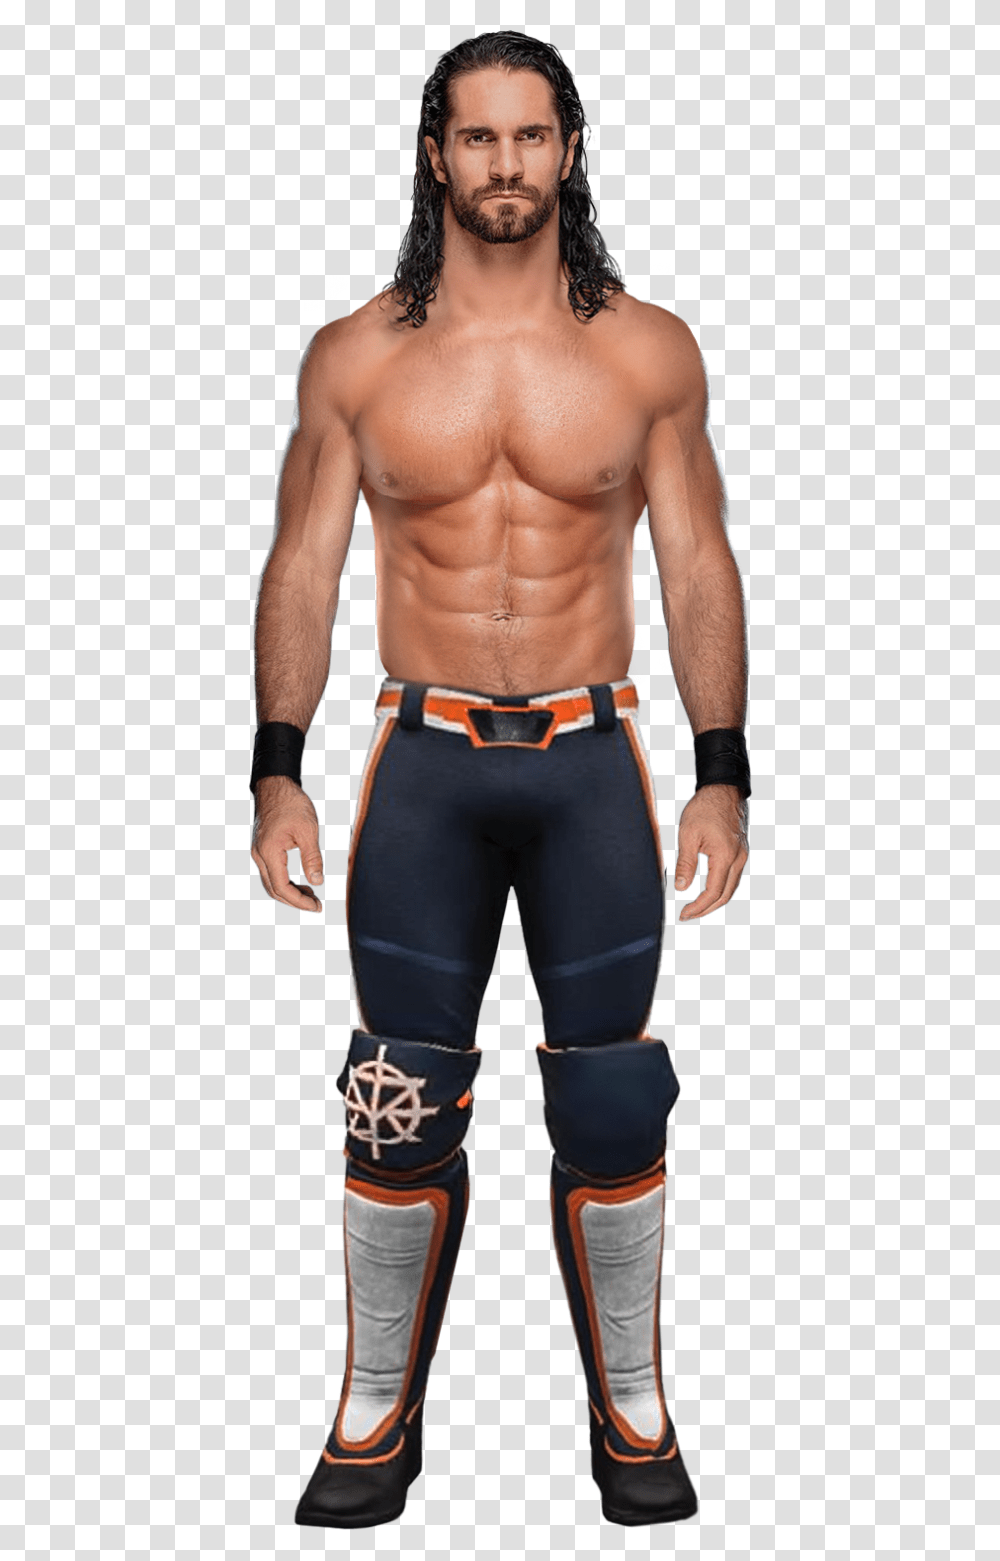 Seth Rollins In His Bearsthemed Attire On Royalrumble Seth Rollins Royal Rumble 2019 Attire, Person, Arm, Man, People Transparent Png